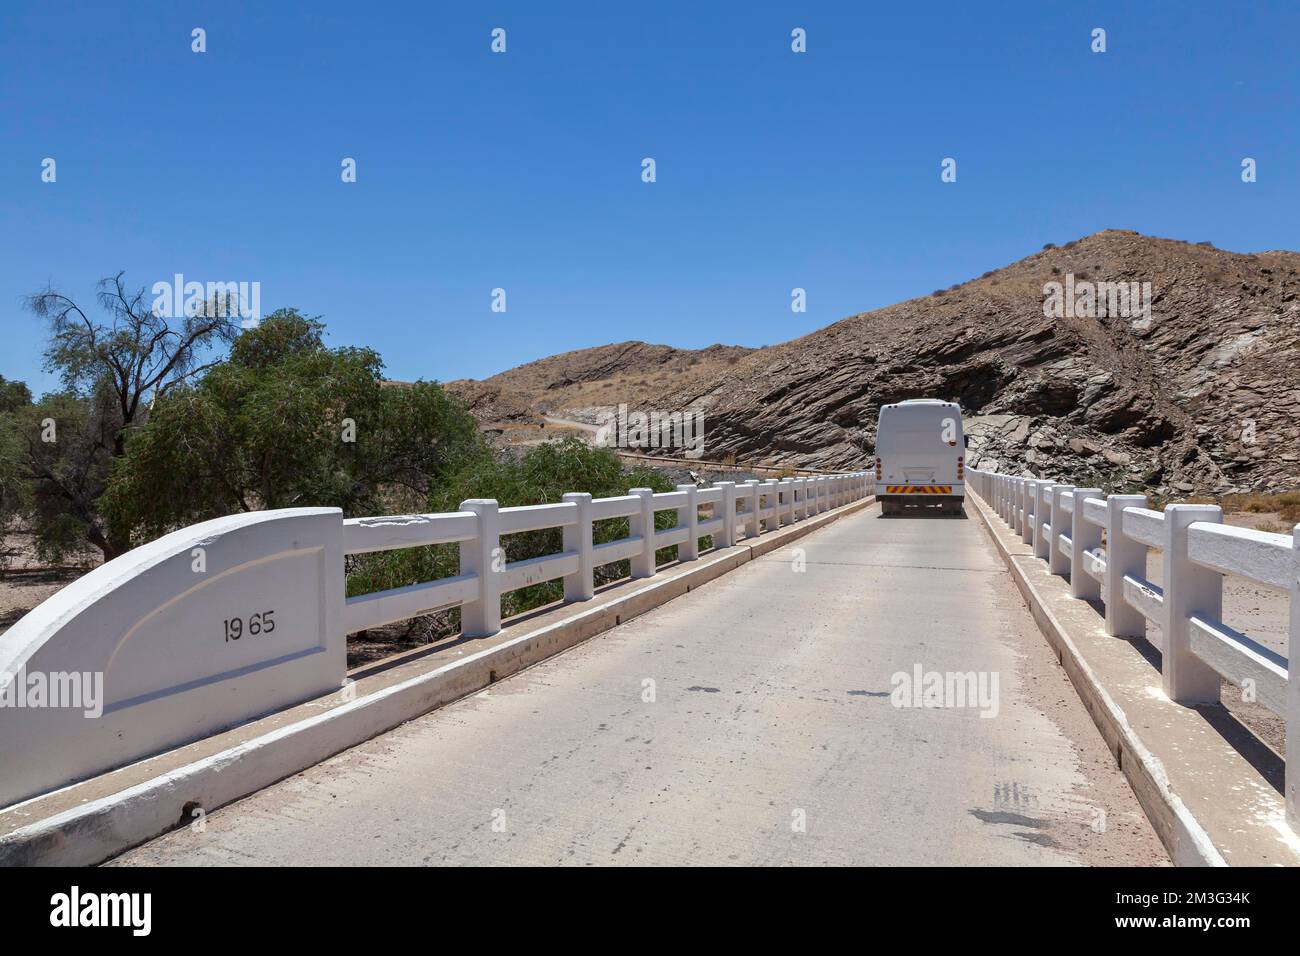 Coach crossing a bridge over the Kuiseb River, C14 on the road, Namibia Stock Photo